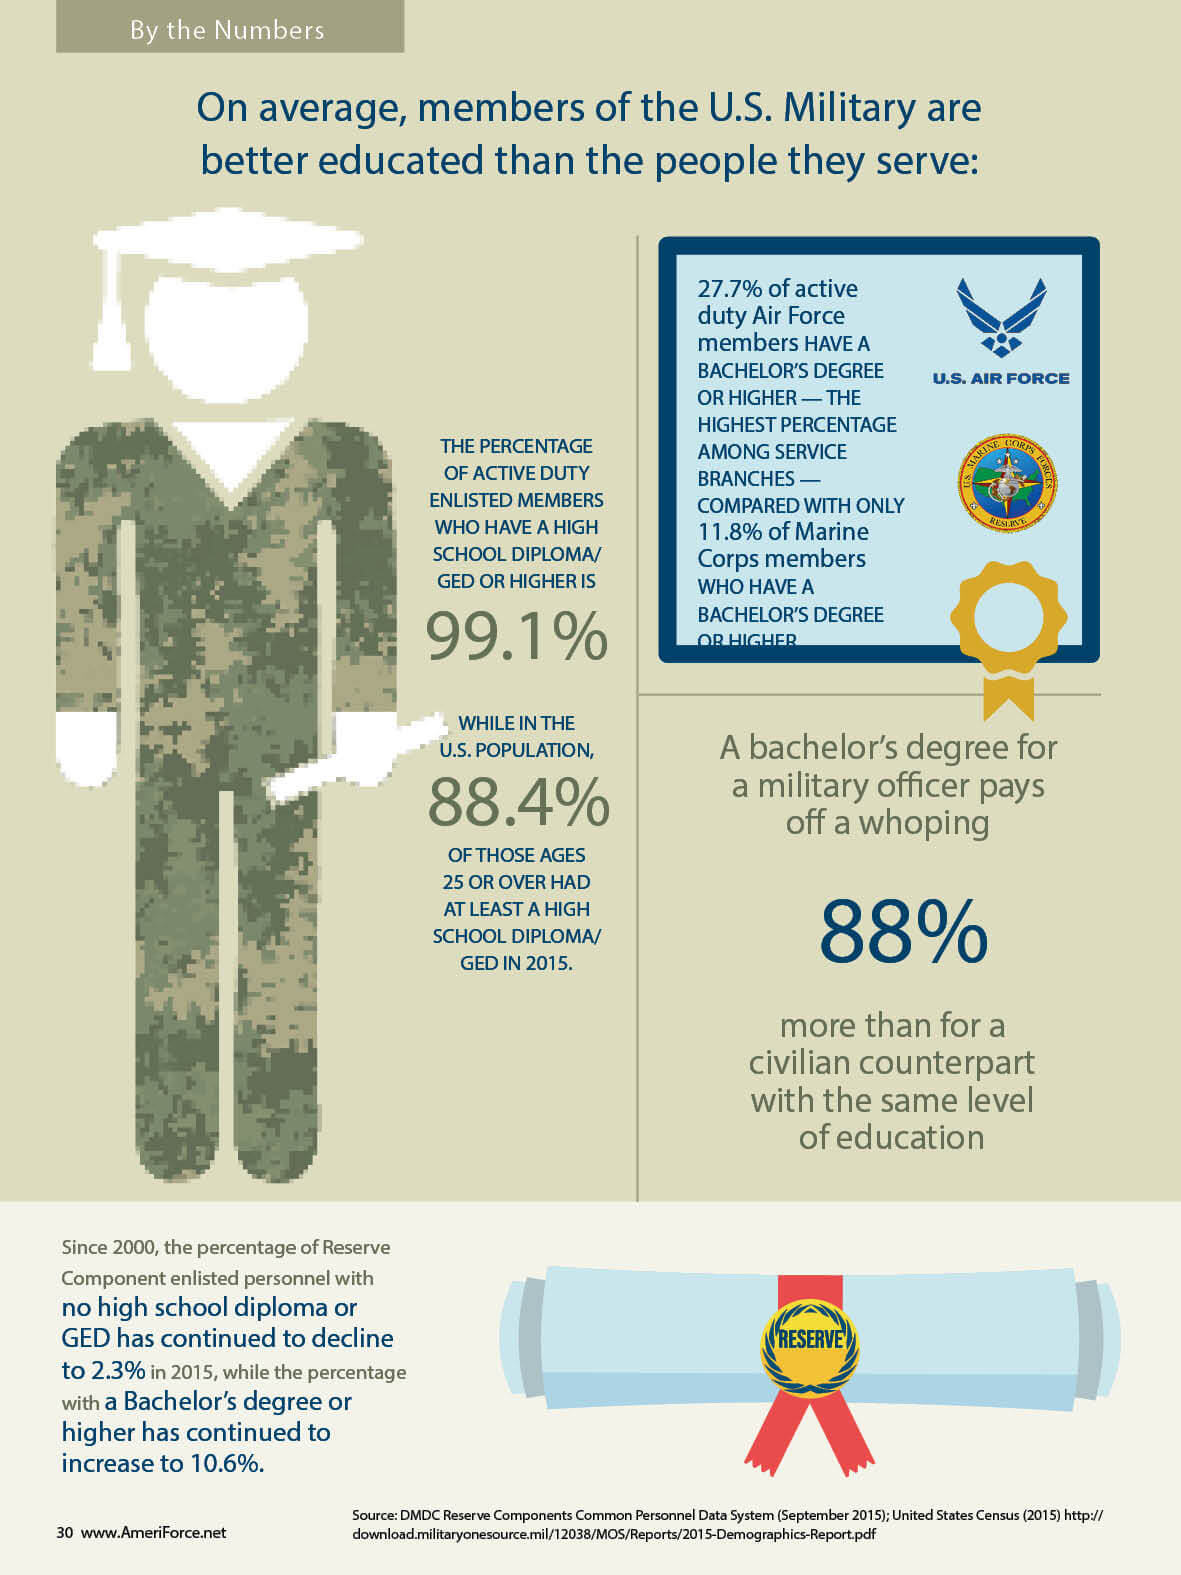 Reserve Components Education Statistics - Military Families